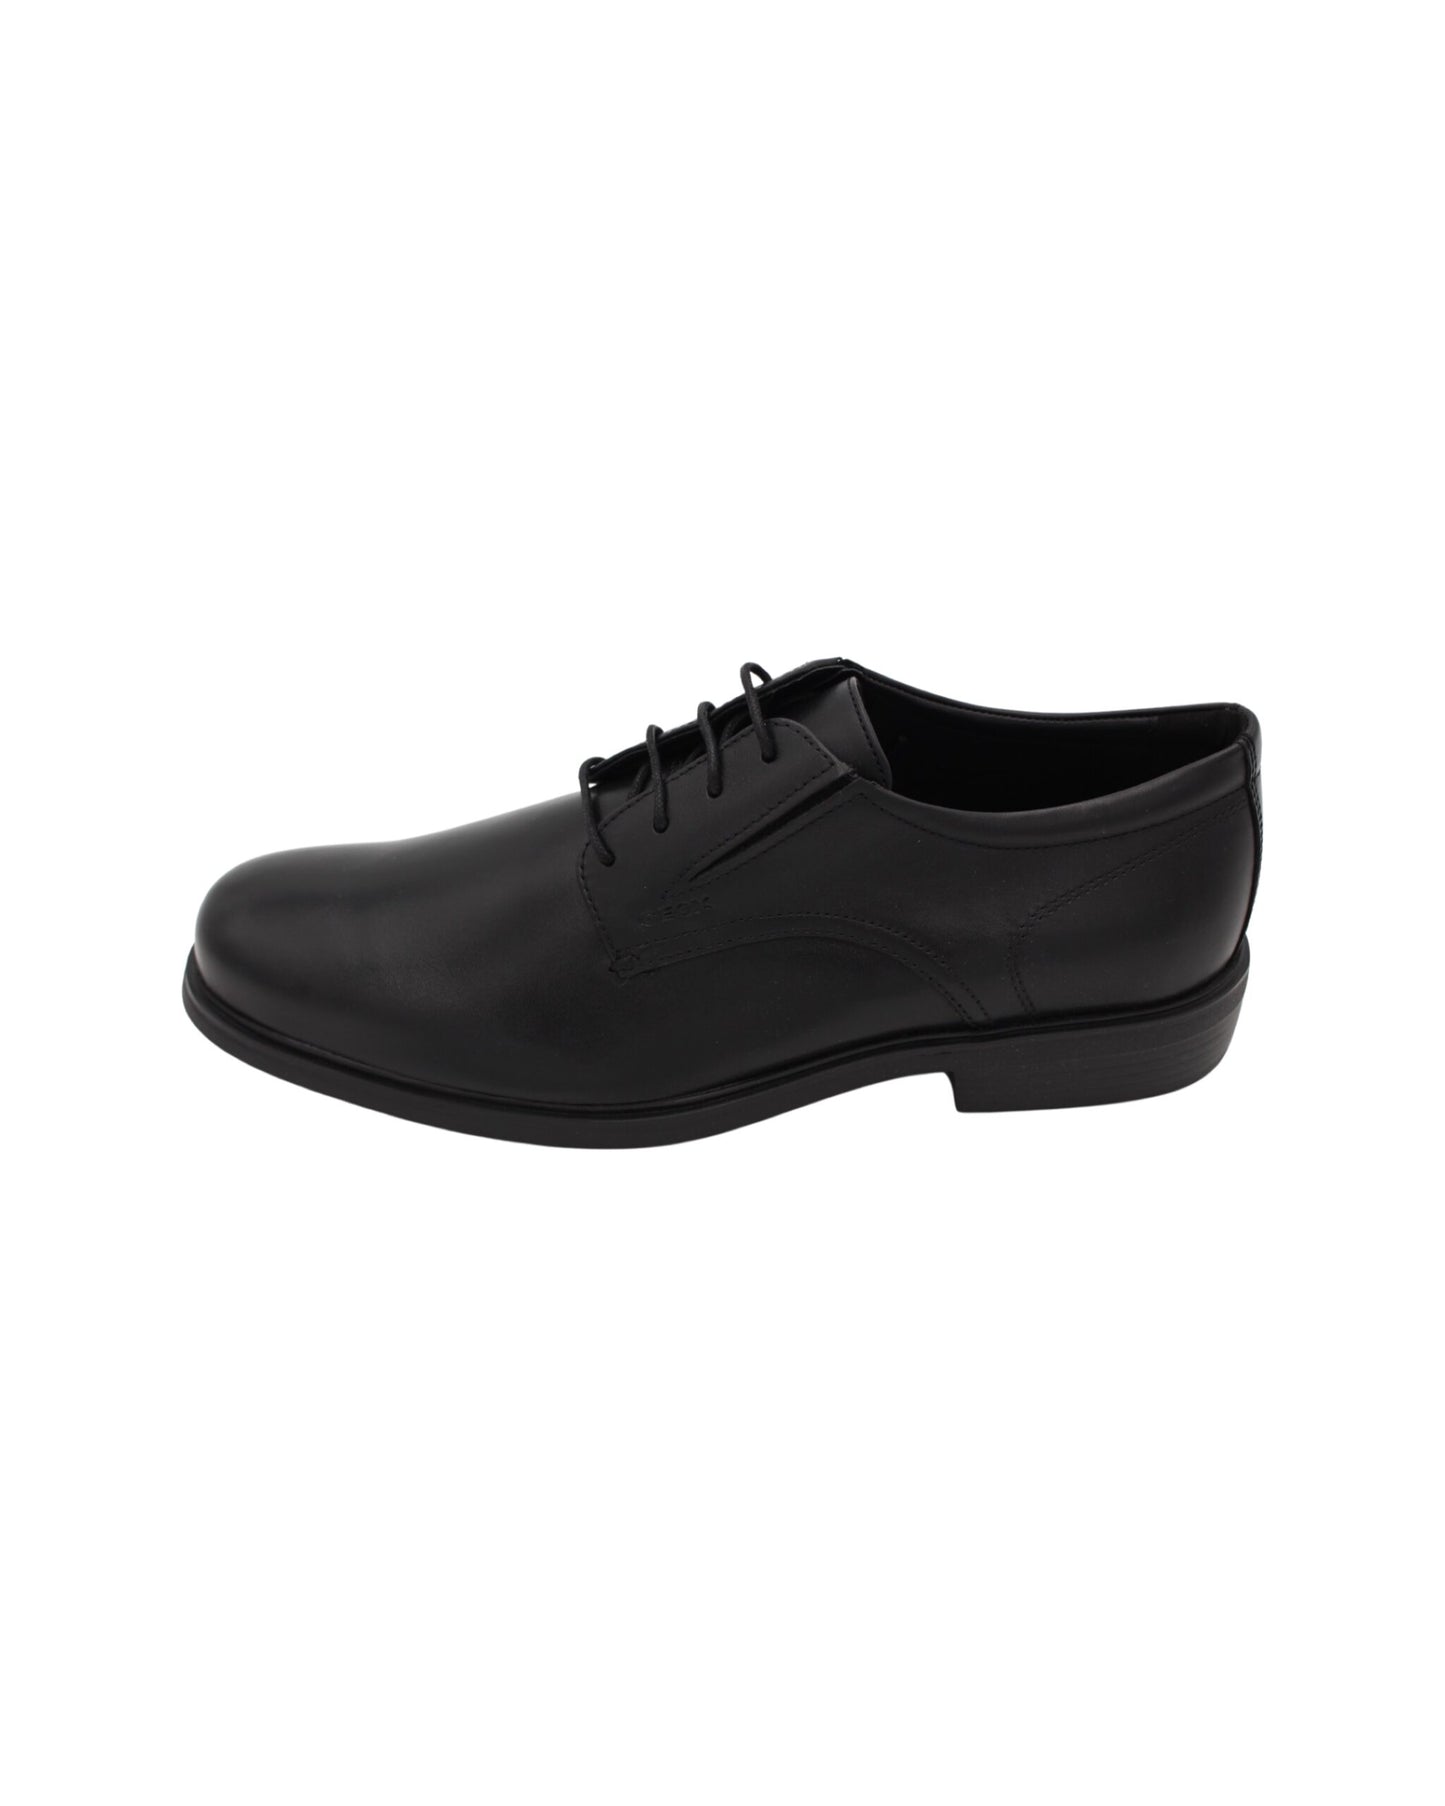 Geox Shoes  Black